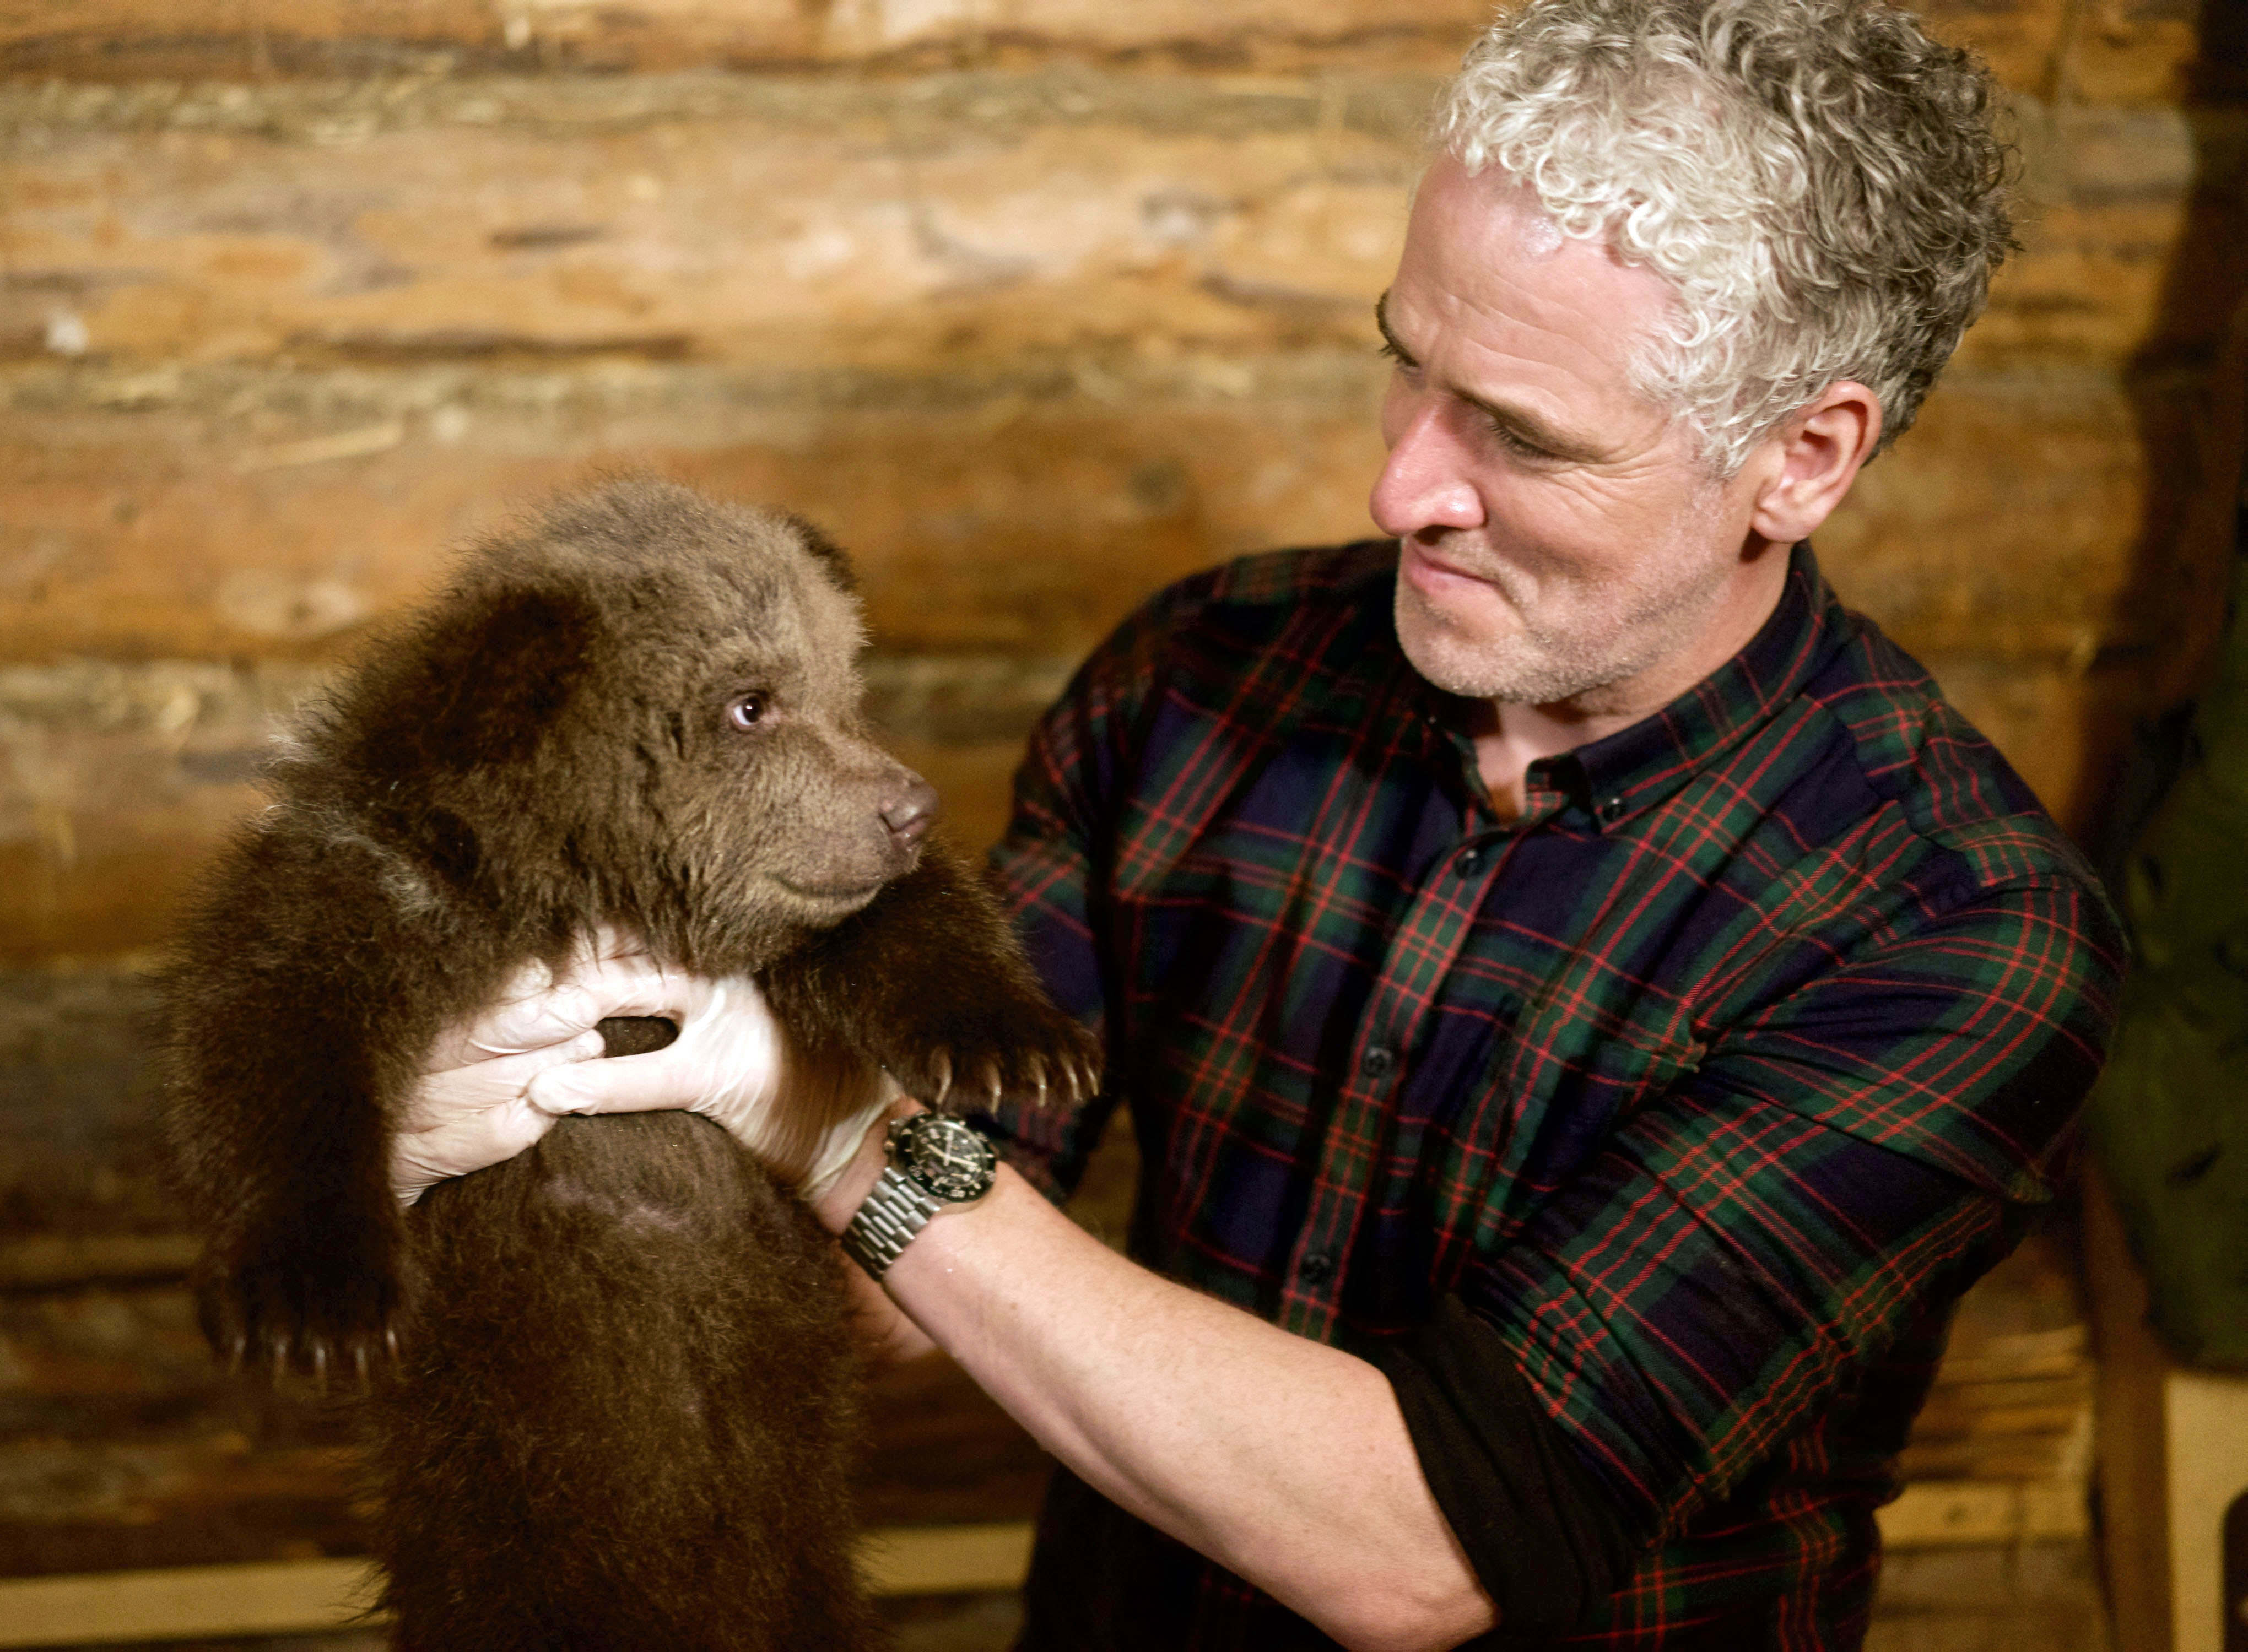 Gordon Buchanan helps to bath an eight-week-old Russian bear cub at the Orphaned Bear Rescue Centre, Bubonitsy, Russia in his new TV series. (Anwar Mamon)